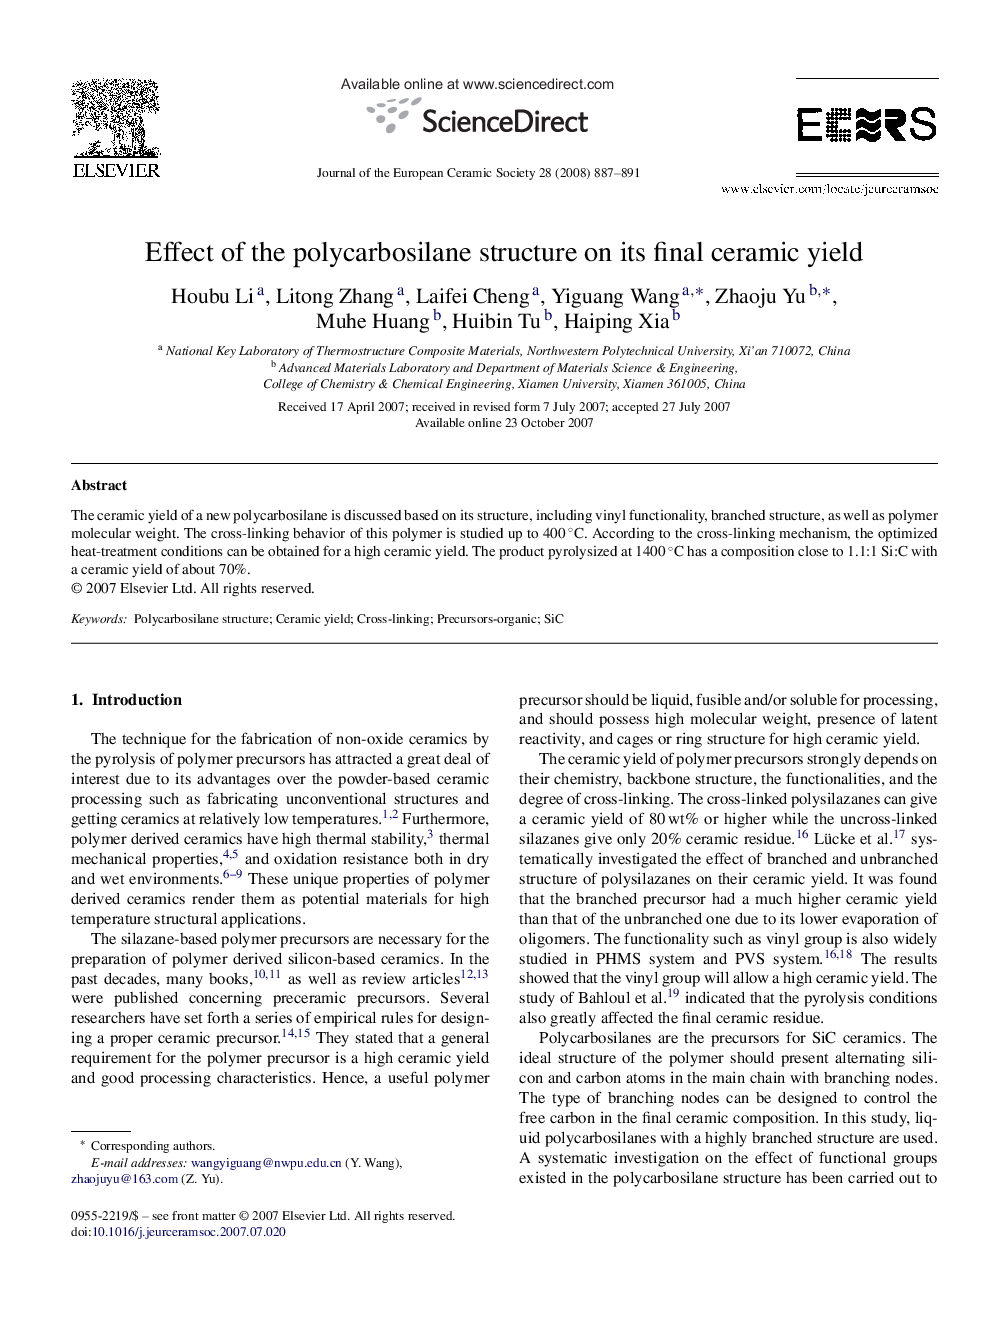 Effect of the polycarbosilane structure on its final ceramic yield